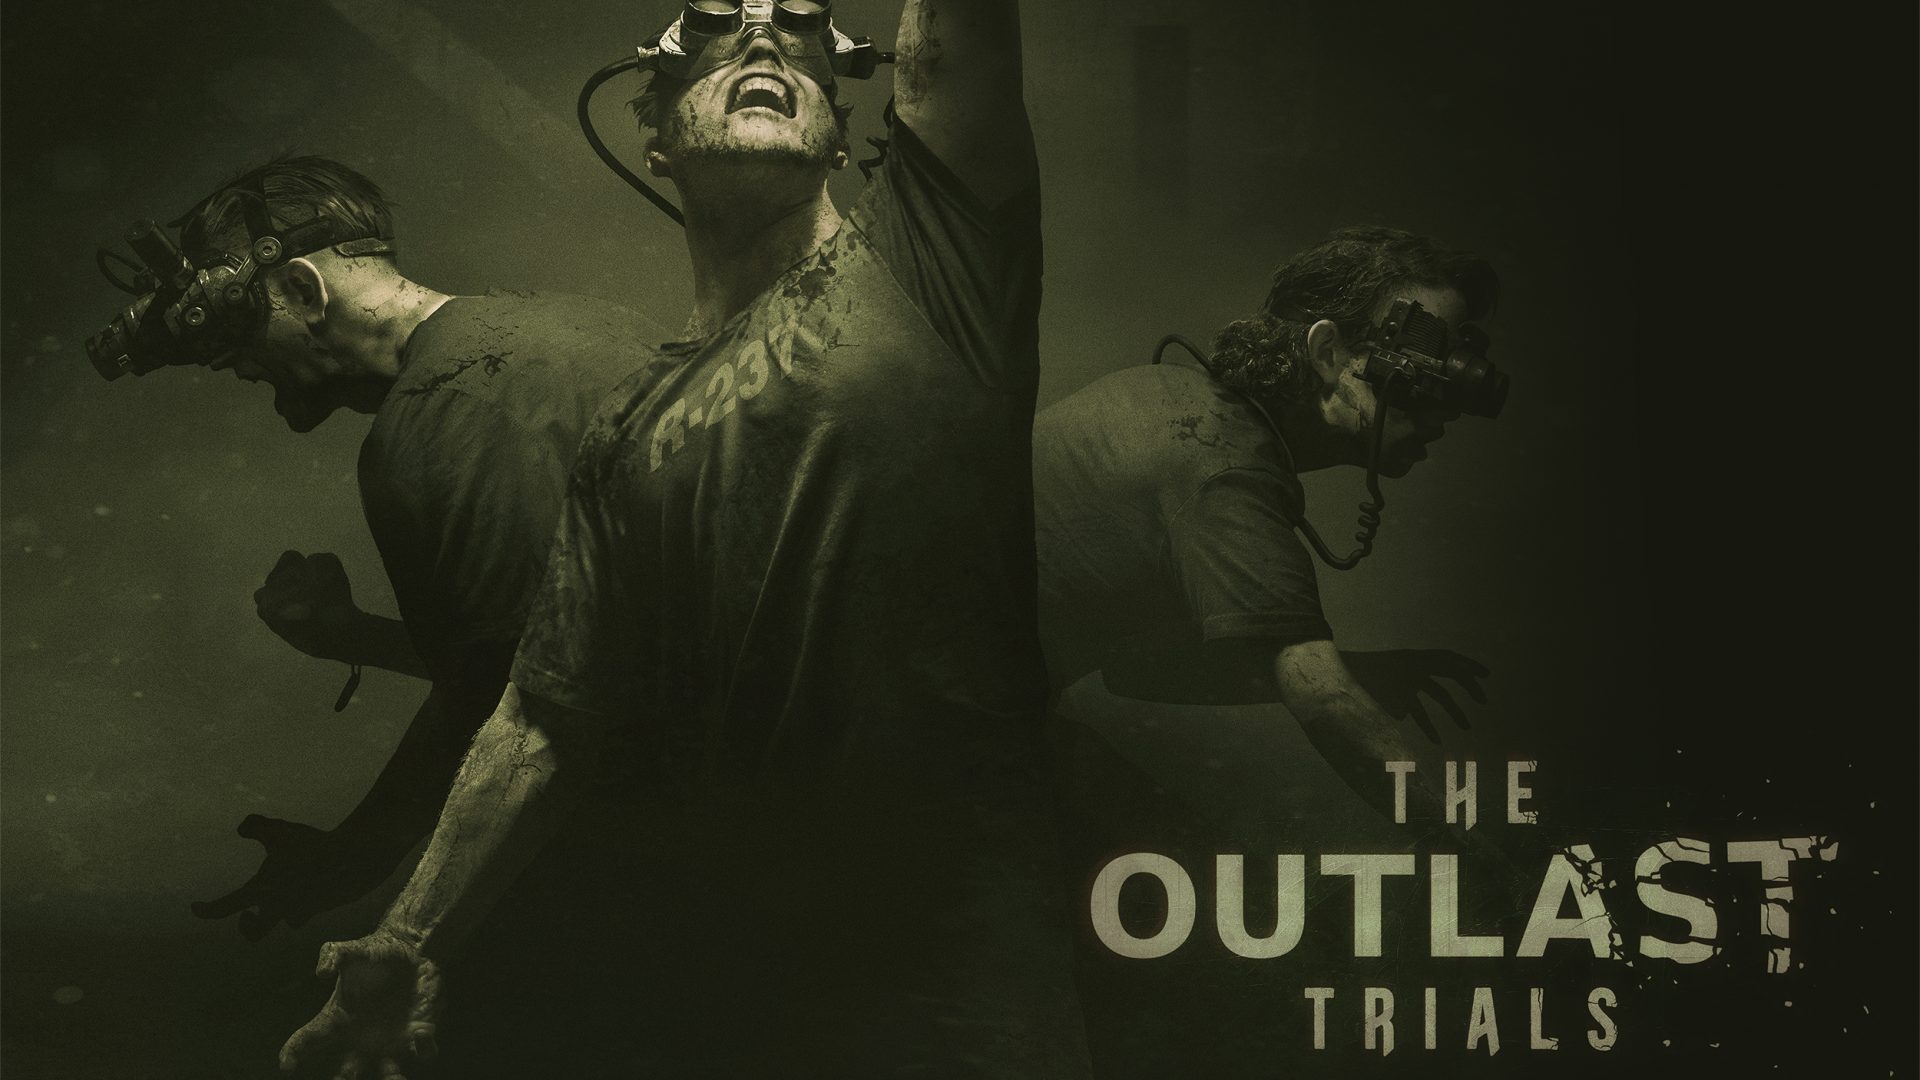 THE OUTLAST TRIALS DROPS BRUTAL GAMEPLAY TRAILER - THE HORROR ENTERTAINMENT  MAGAZINE